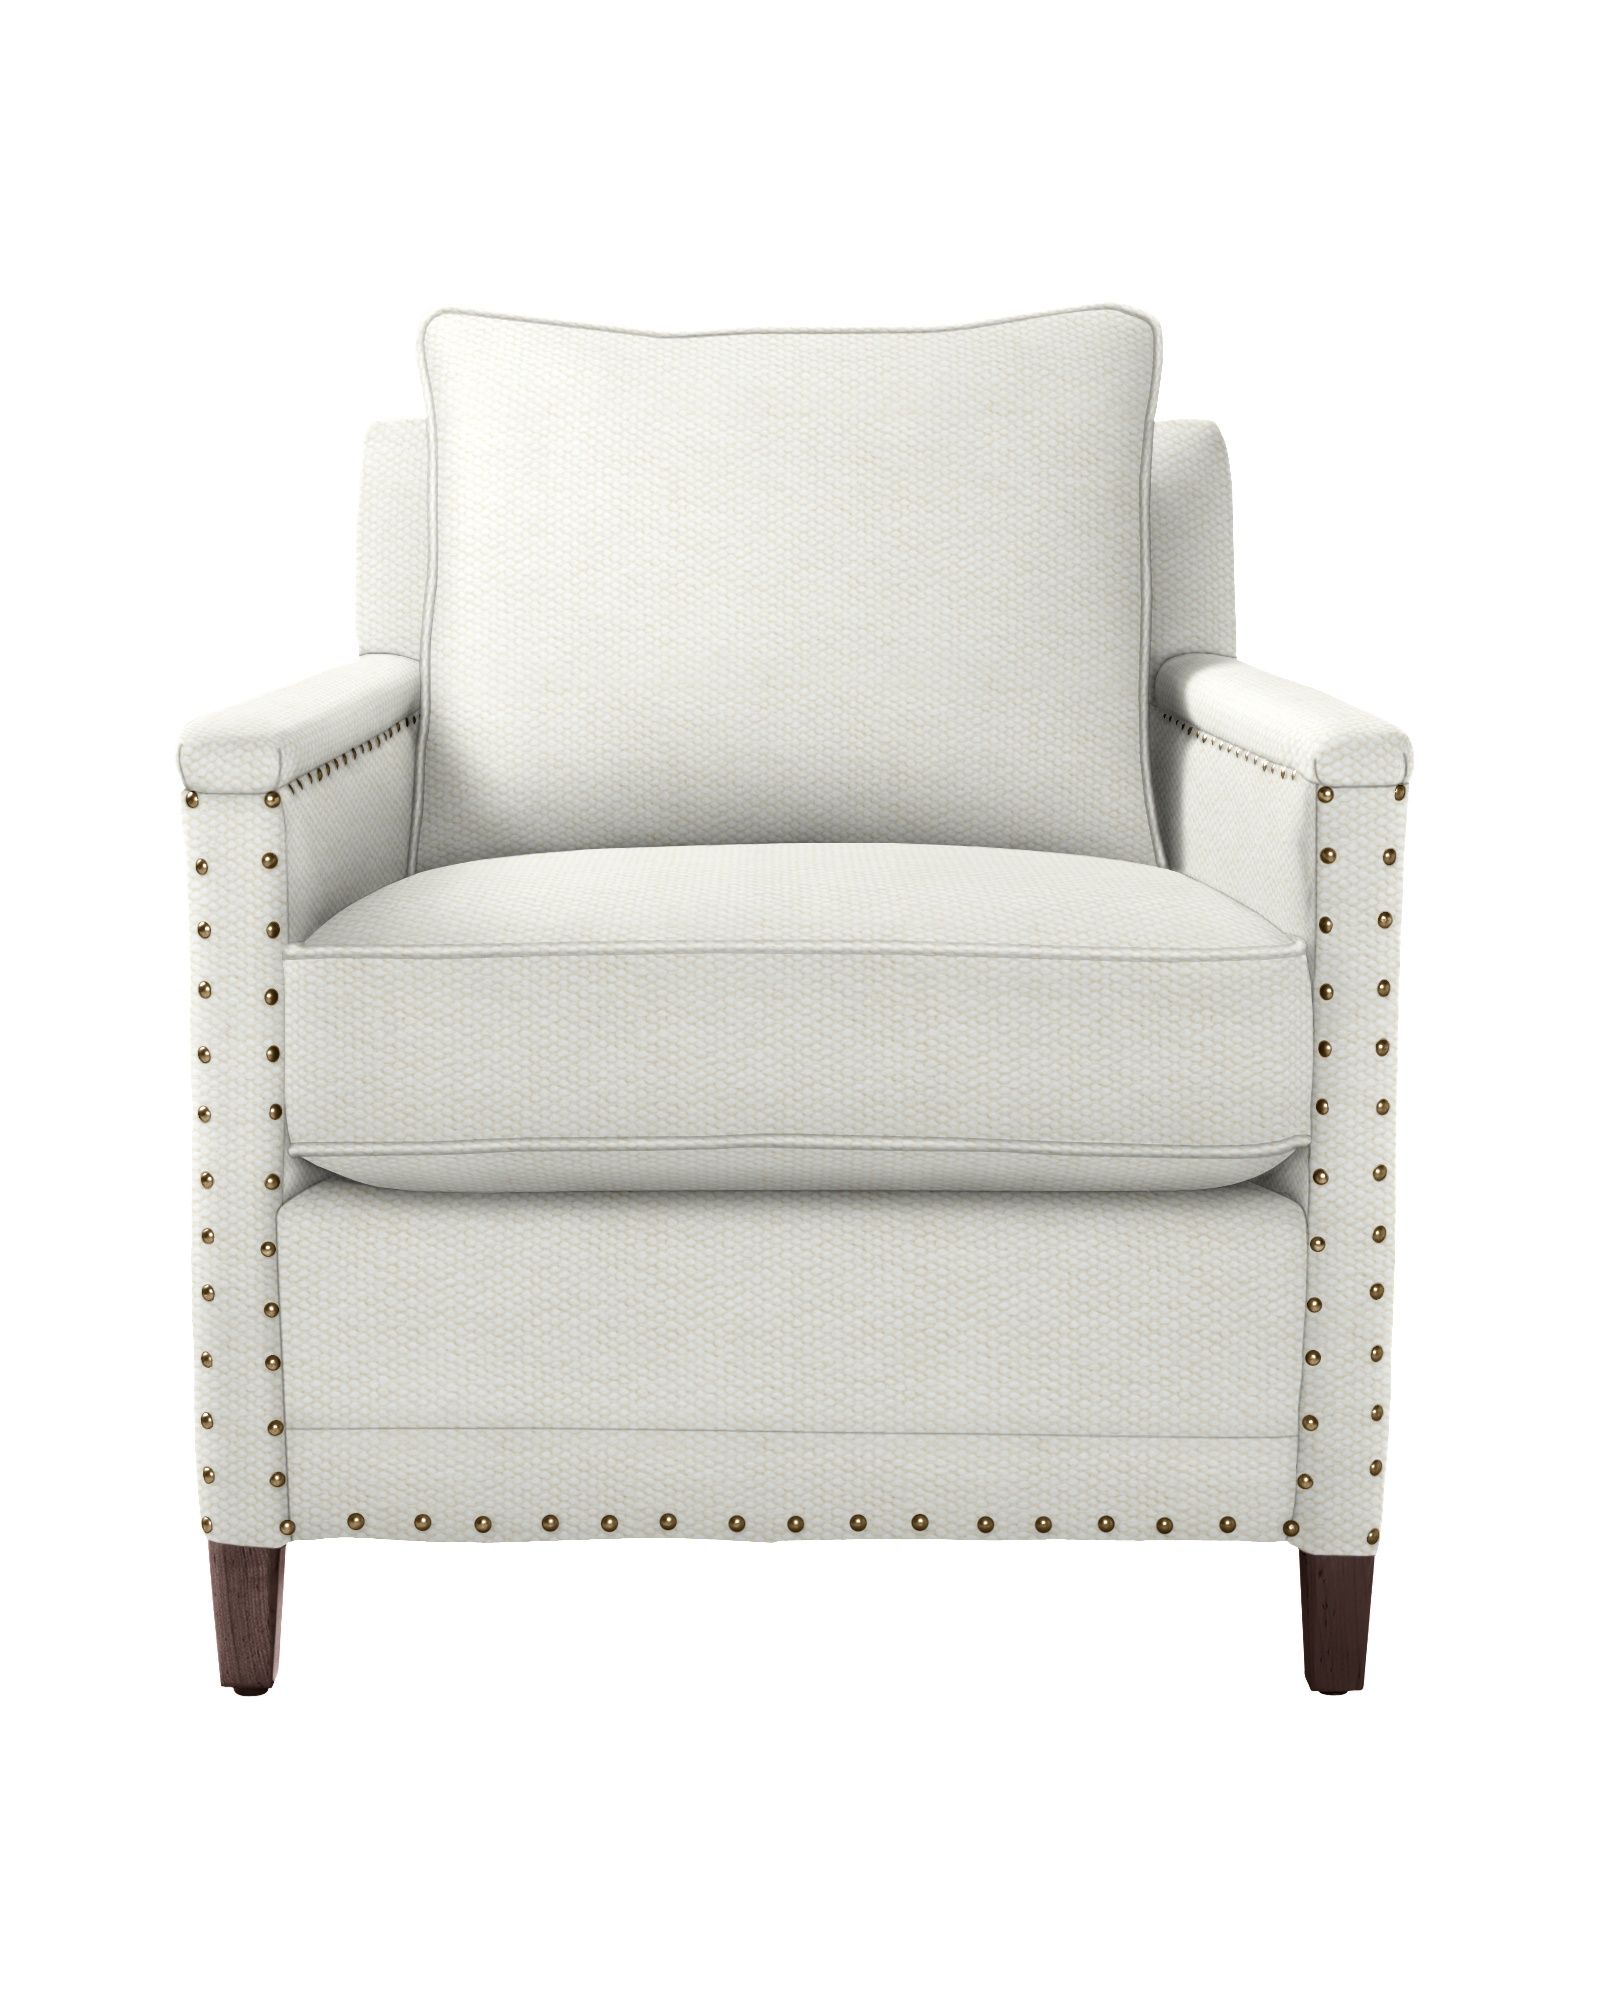 Spruce Street Chair with Nailheads | Serena and Lily